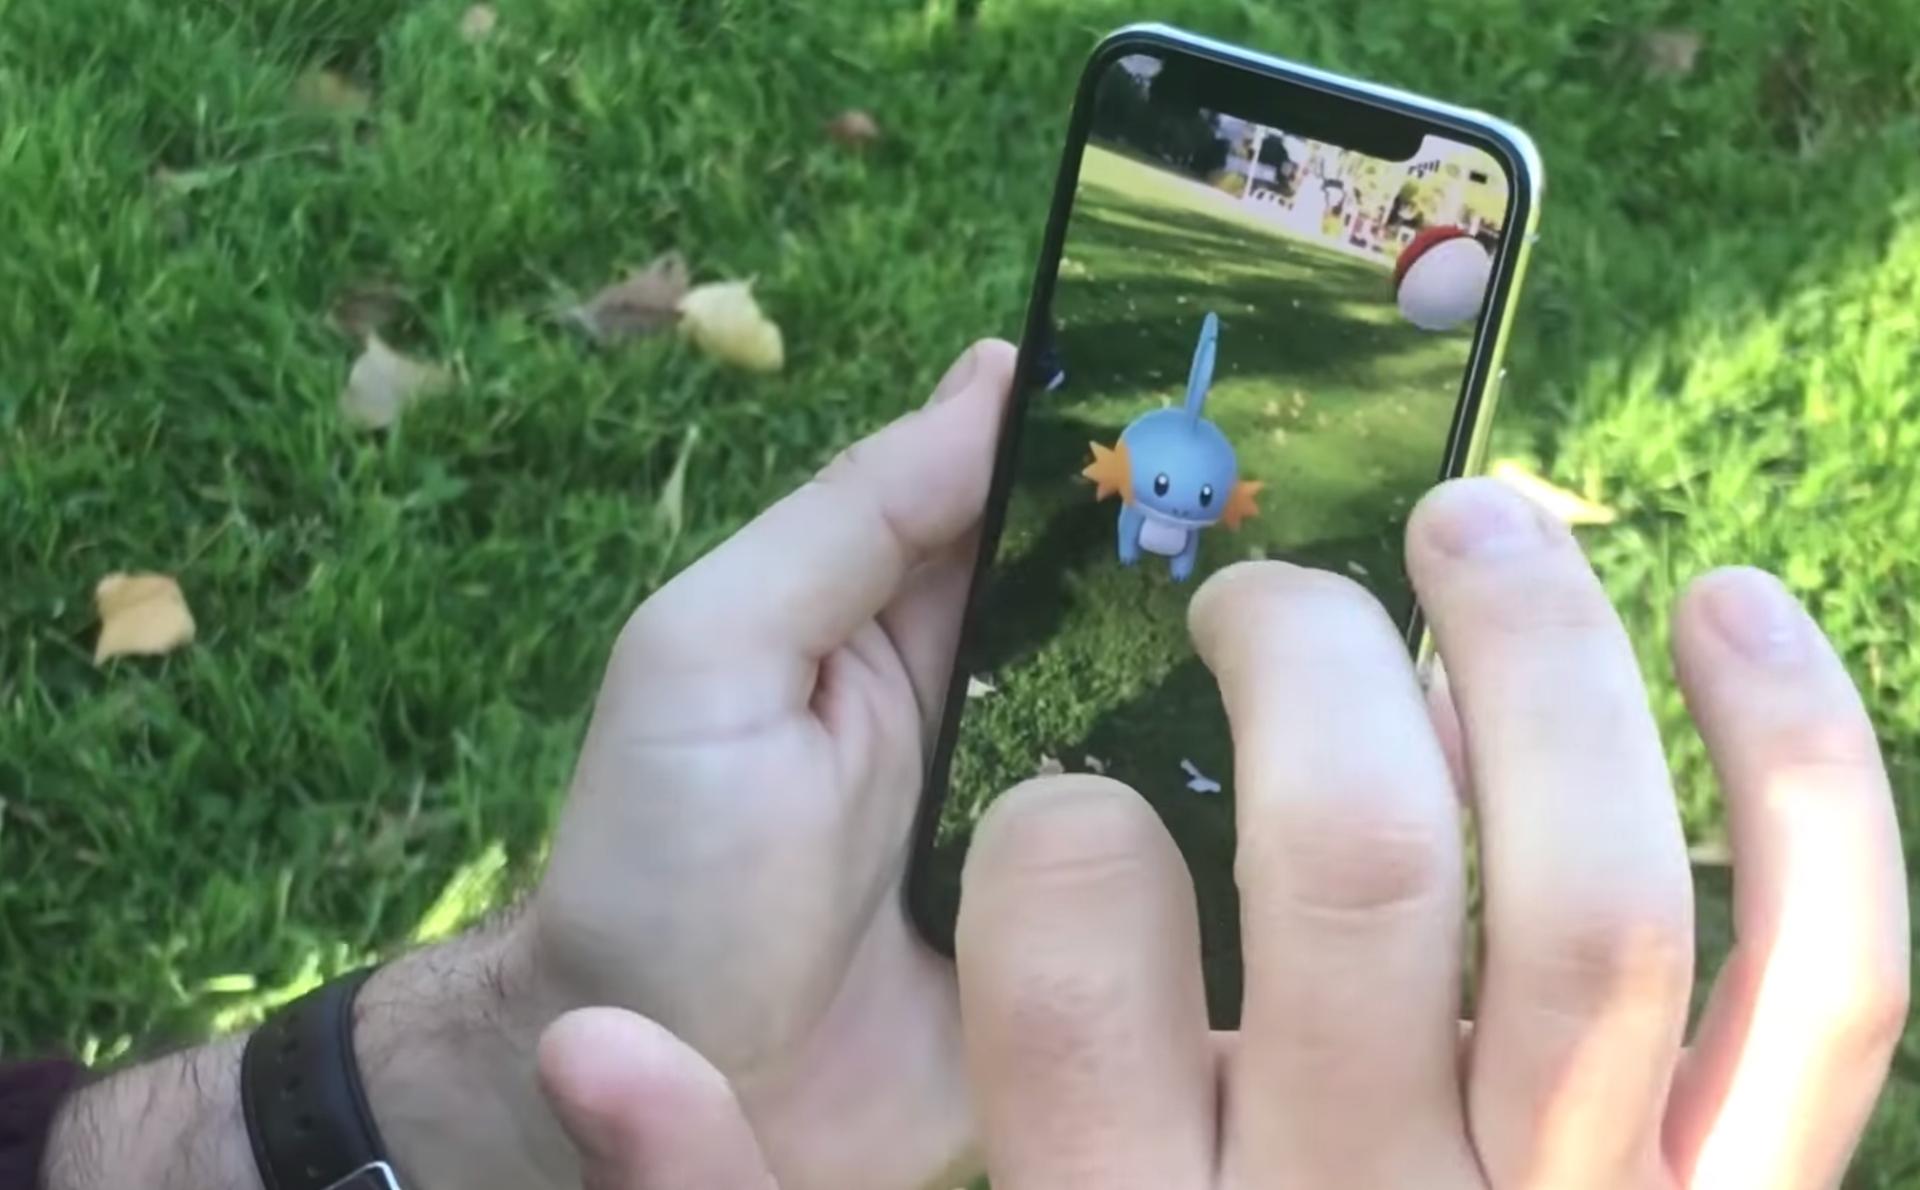 Pokemon GO players are always after new and unique Pokemons to add to their collection, and today we're covering how to get Maractus in Pokemon GO.